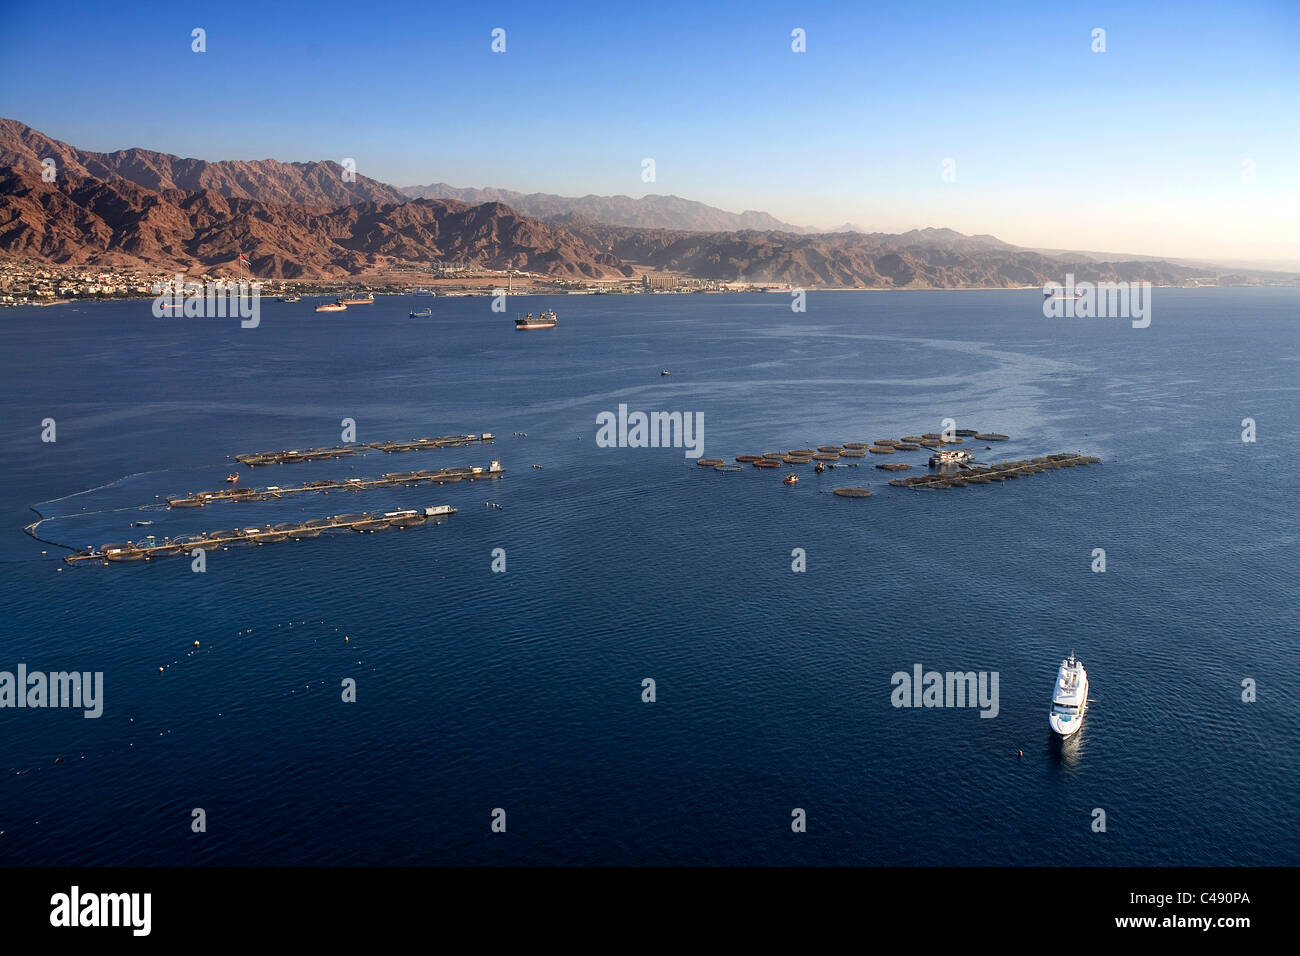 Aerial photograph of the Red Sea Stock Photo